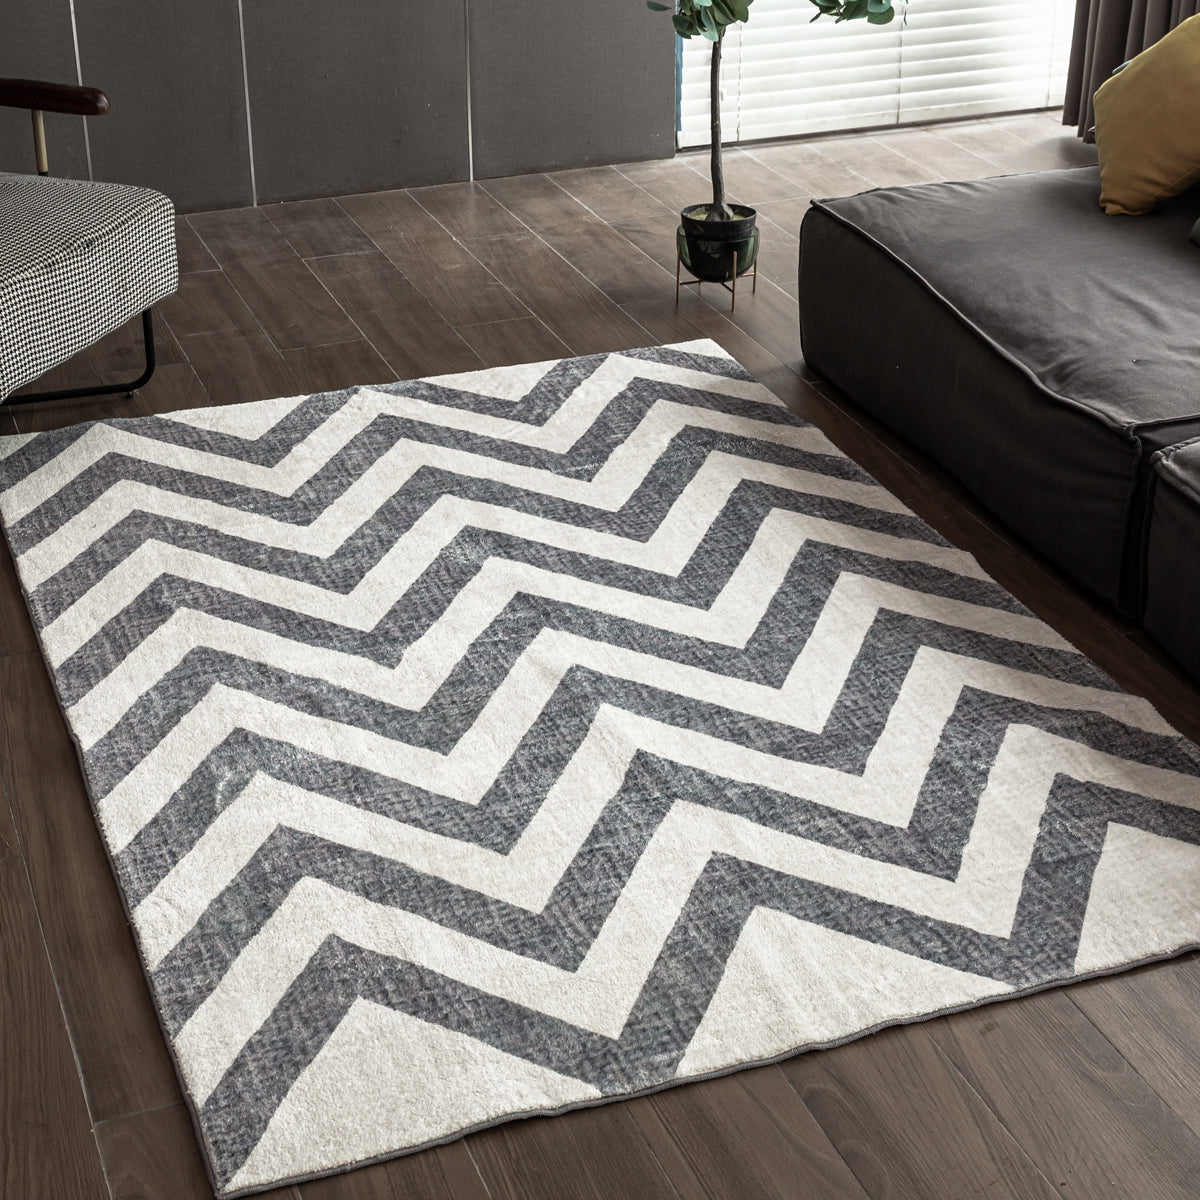 Snailhome® Area Rugs Nonslip Modern Soft Home Room Contemporary